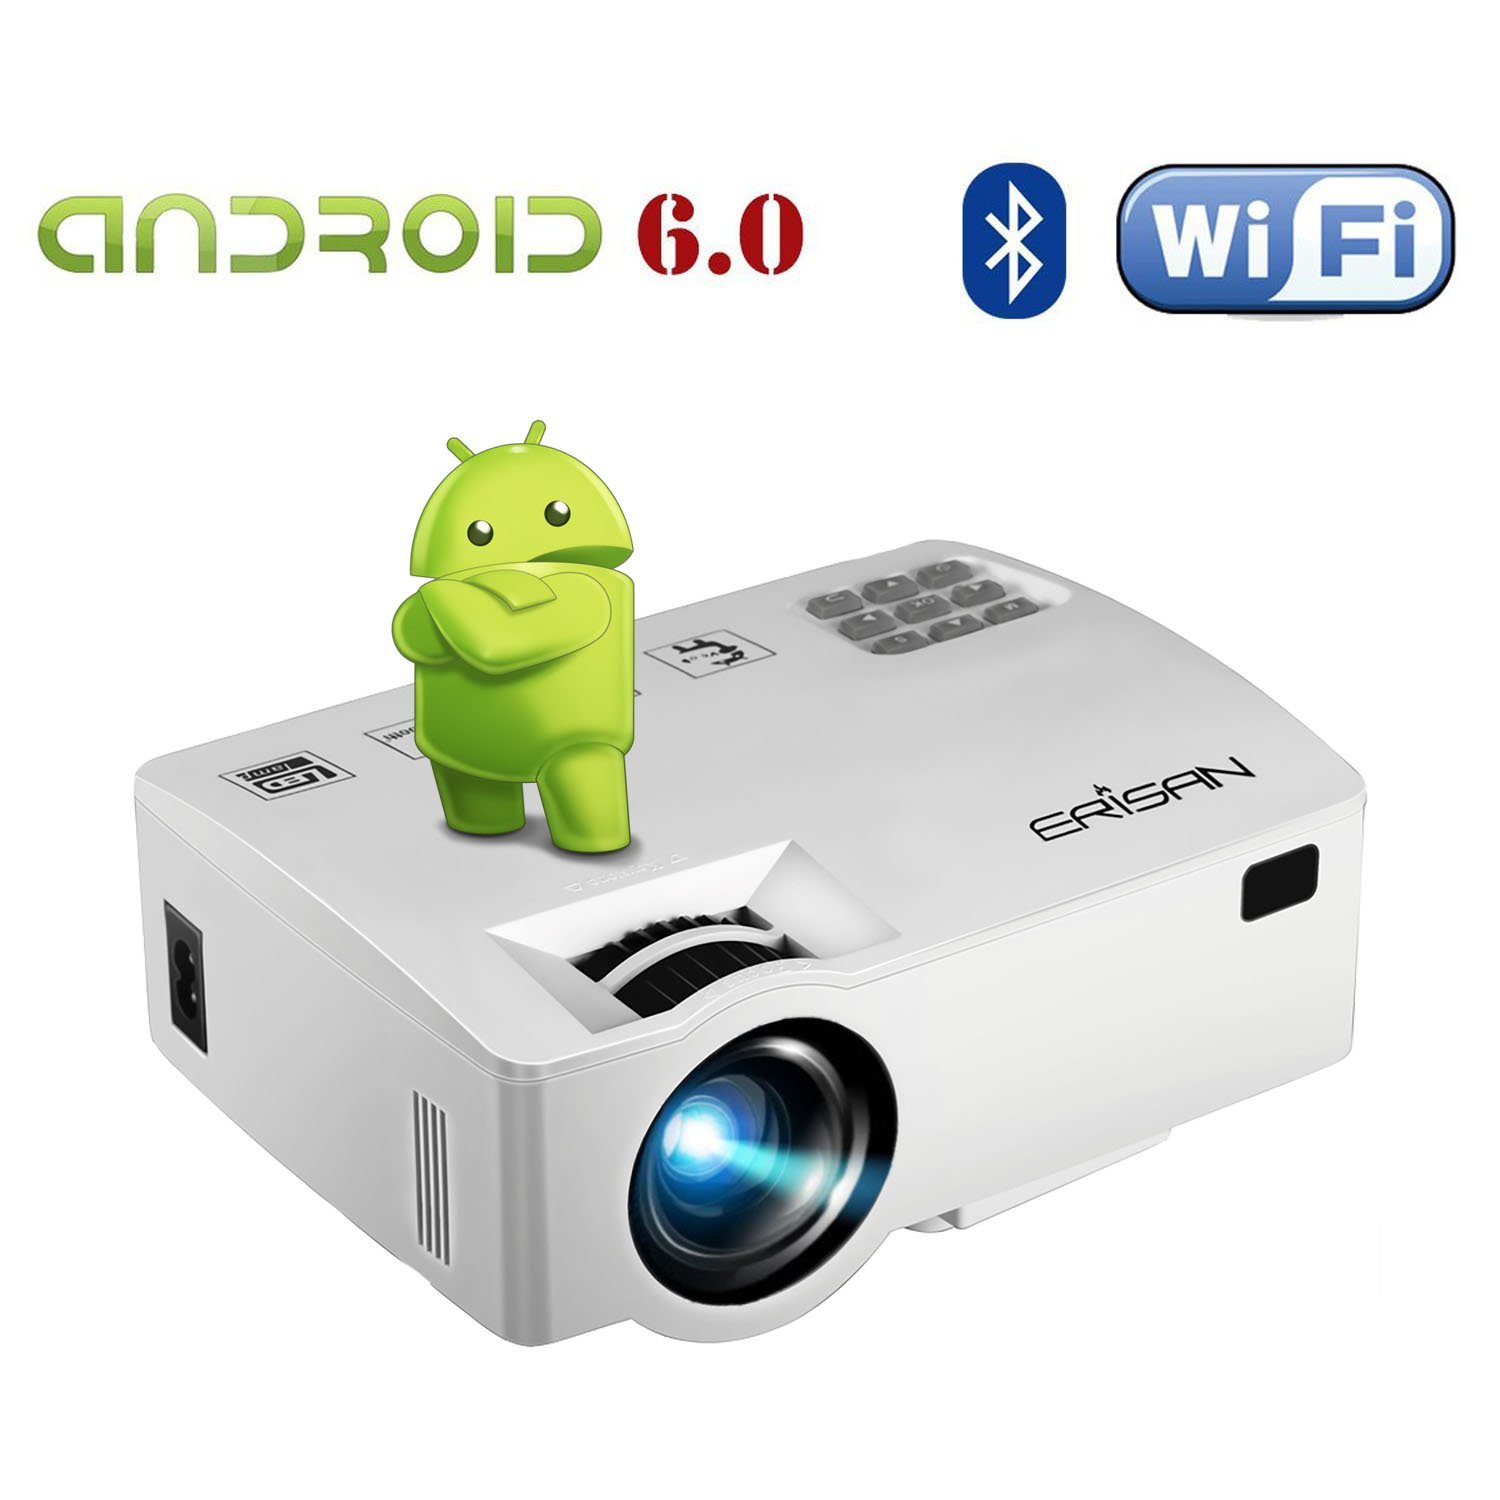 ERISAN Android 6.0 Projector (Warranty Included), Built-in Wi-Fi